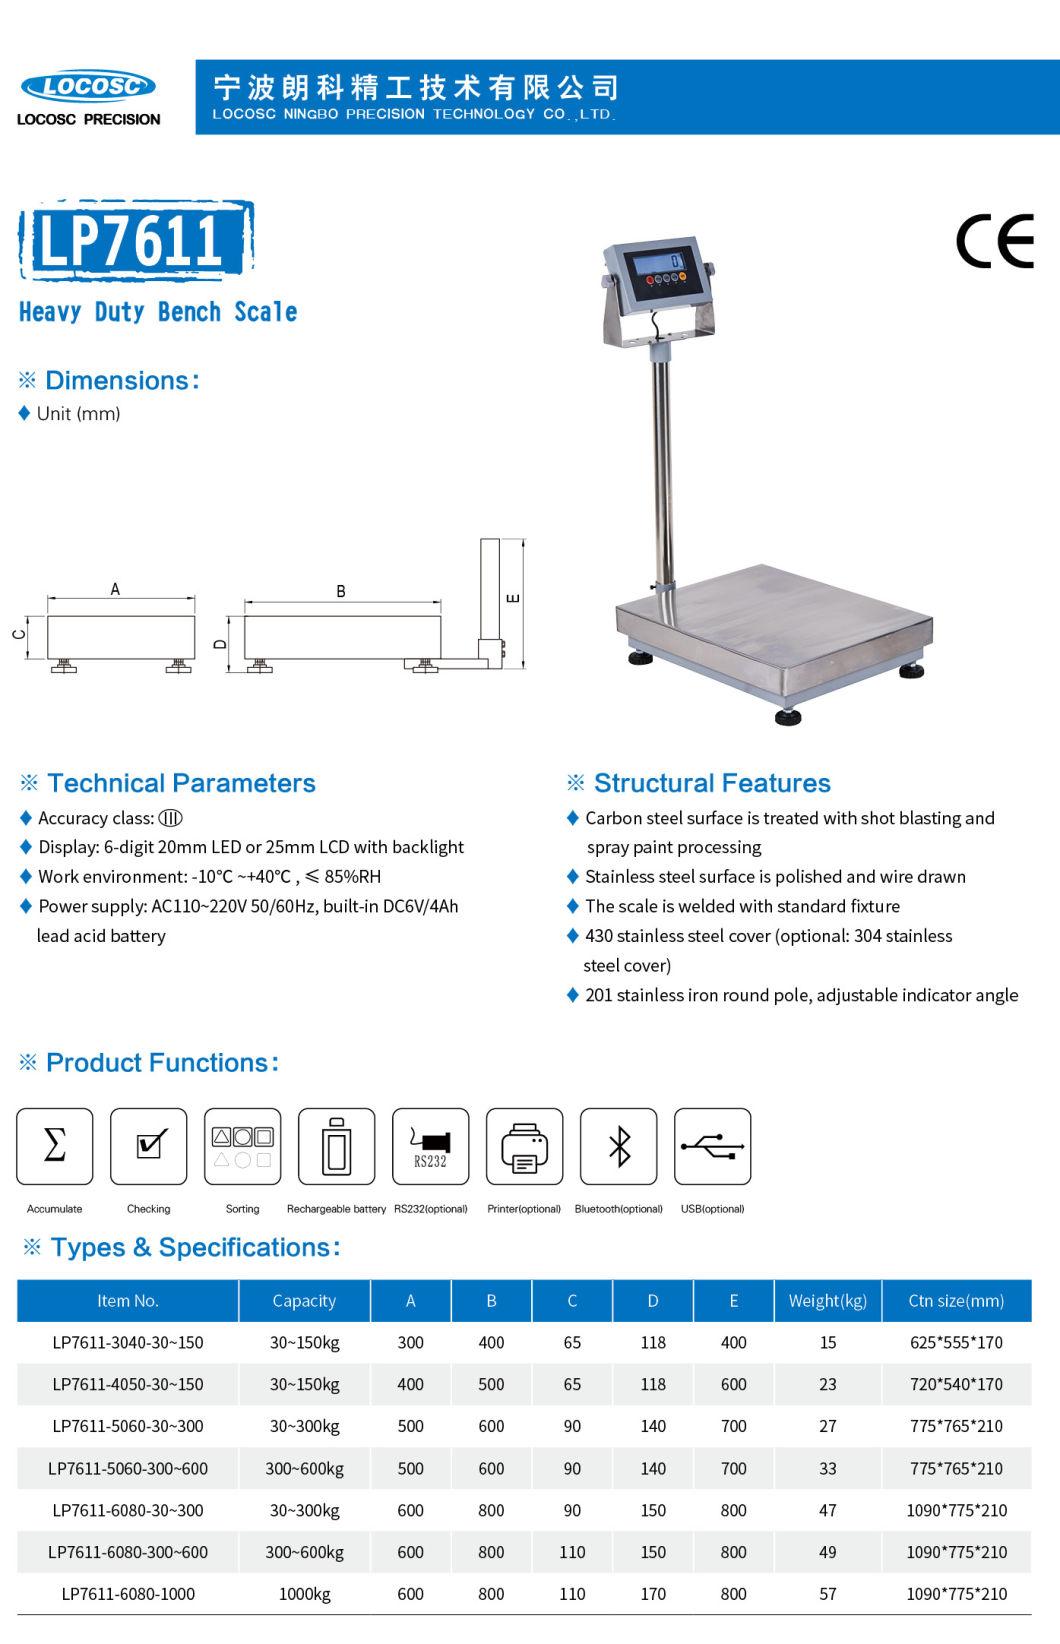 High Accuracy Tcs Electronic Platform Scale